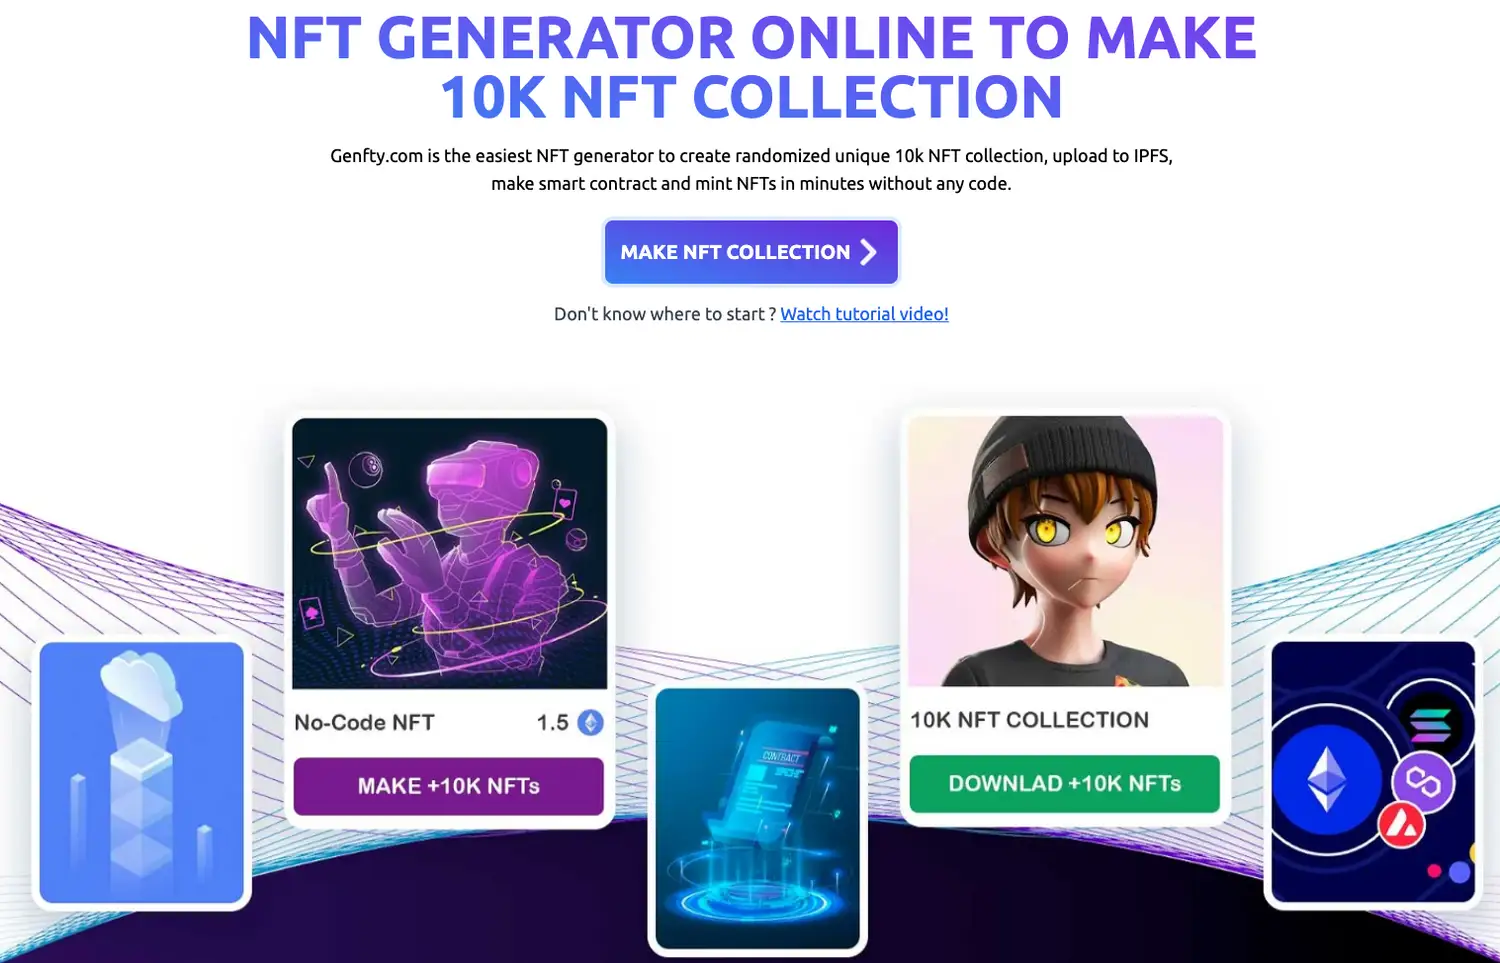 Why is NFT-Inator a great alternative to Genfty